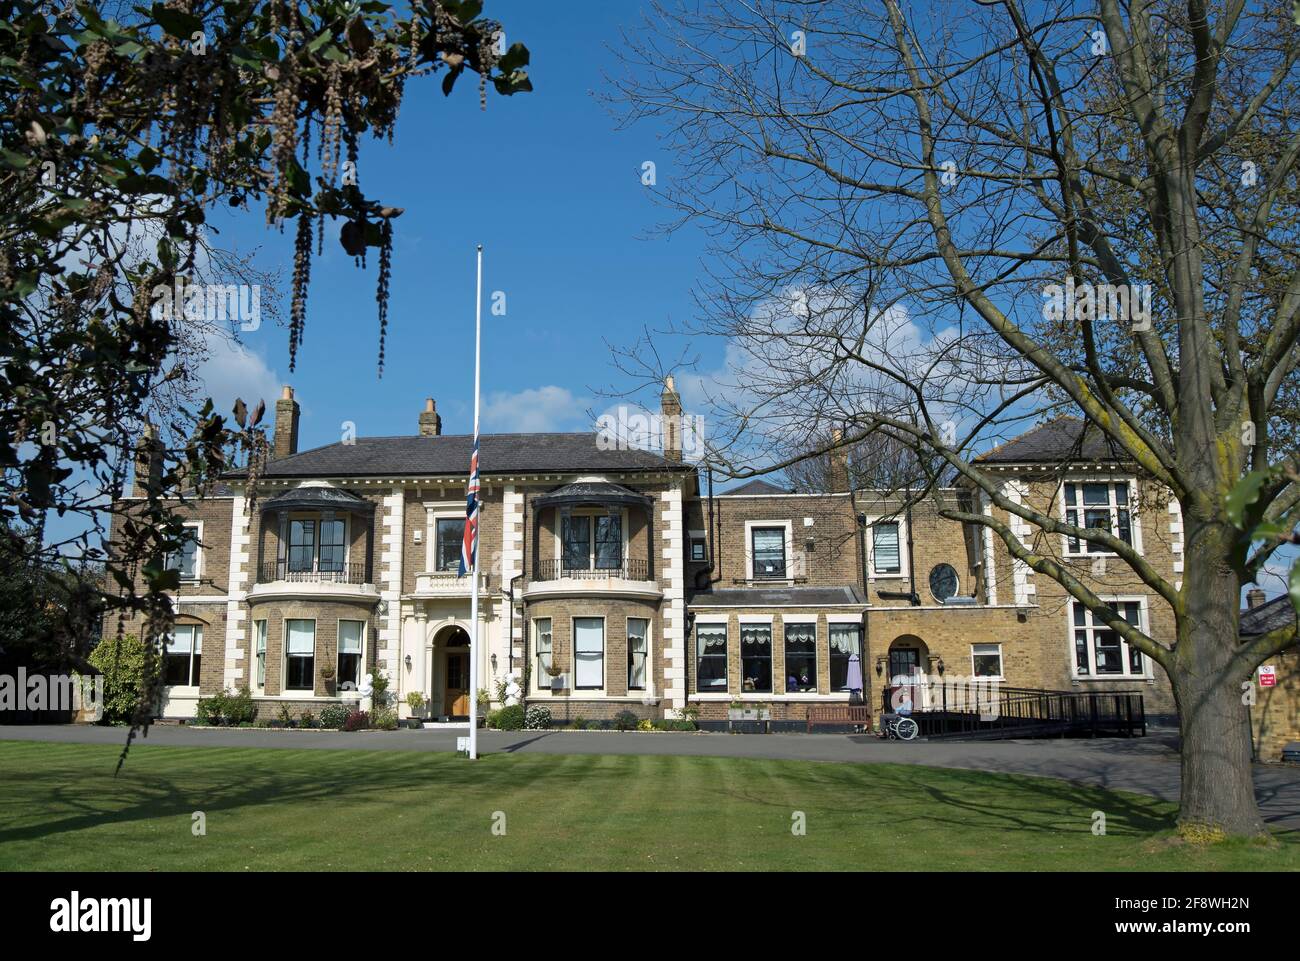 exterior of the 1850 brinsworth house, since 1911 a retirement home for theatre and entertainment professionals, in twickenham, middlesex, england Stock Photo